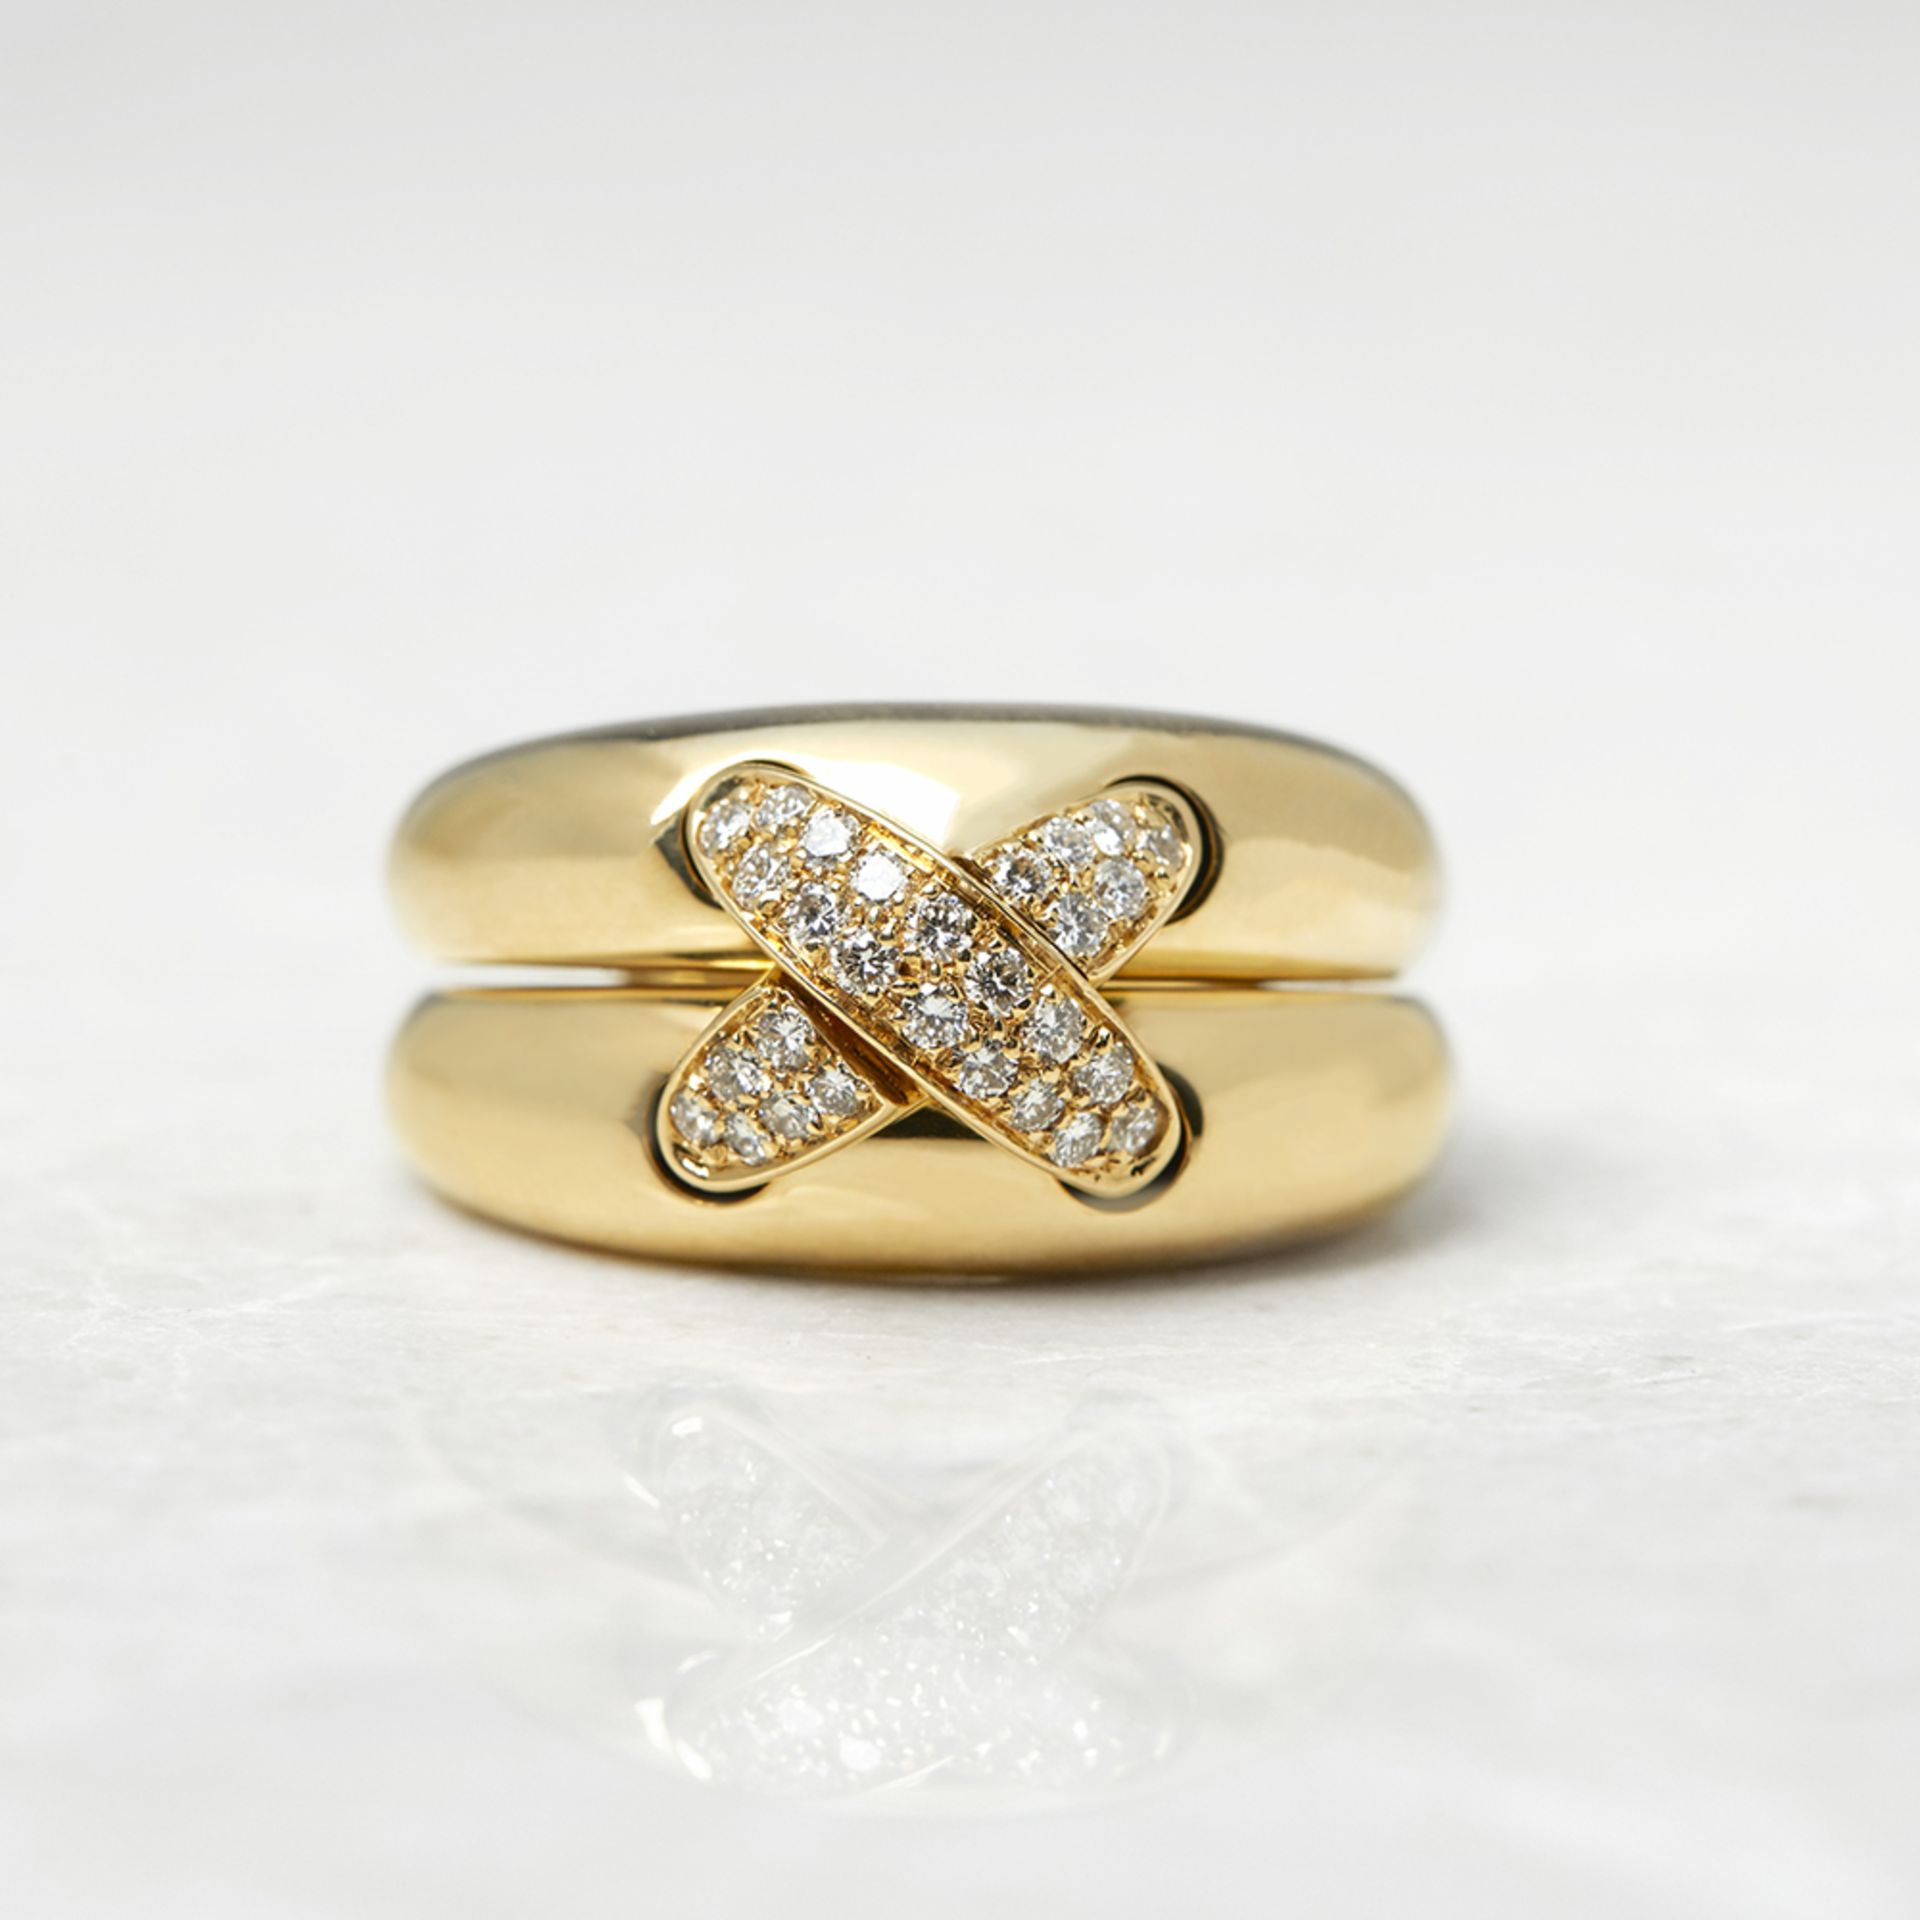 Chaumet 18k Yellow Gold 0.30ct Diamond Liens Ring - Image 8 of 16